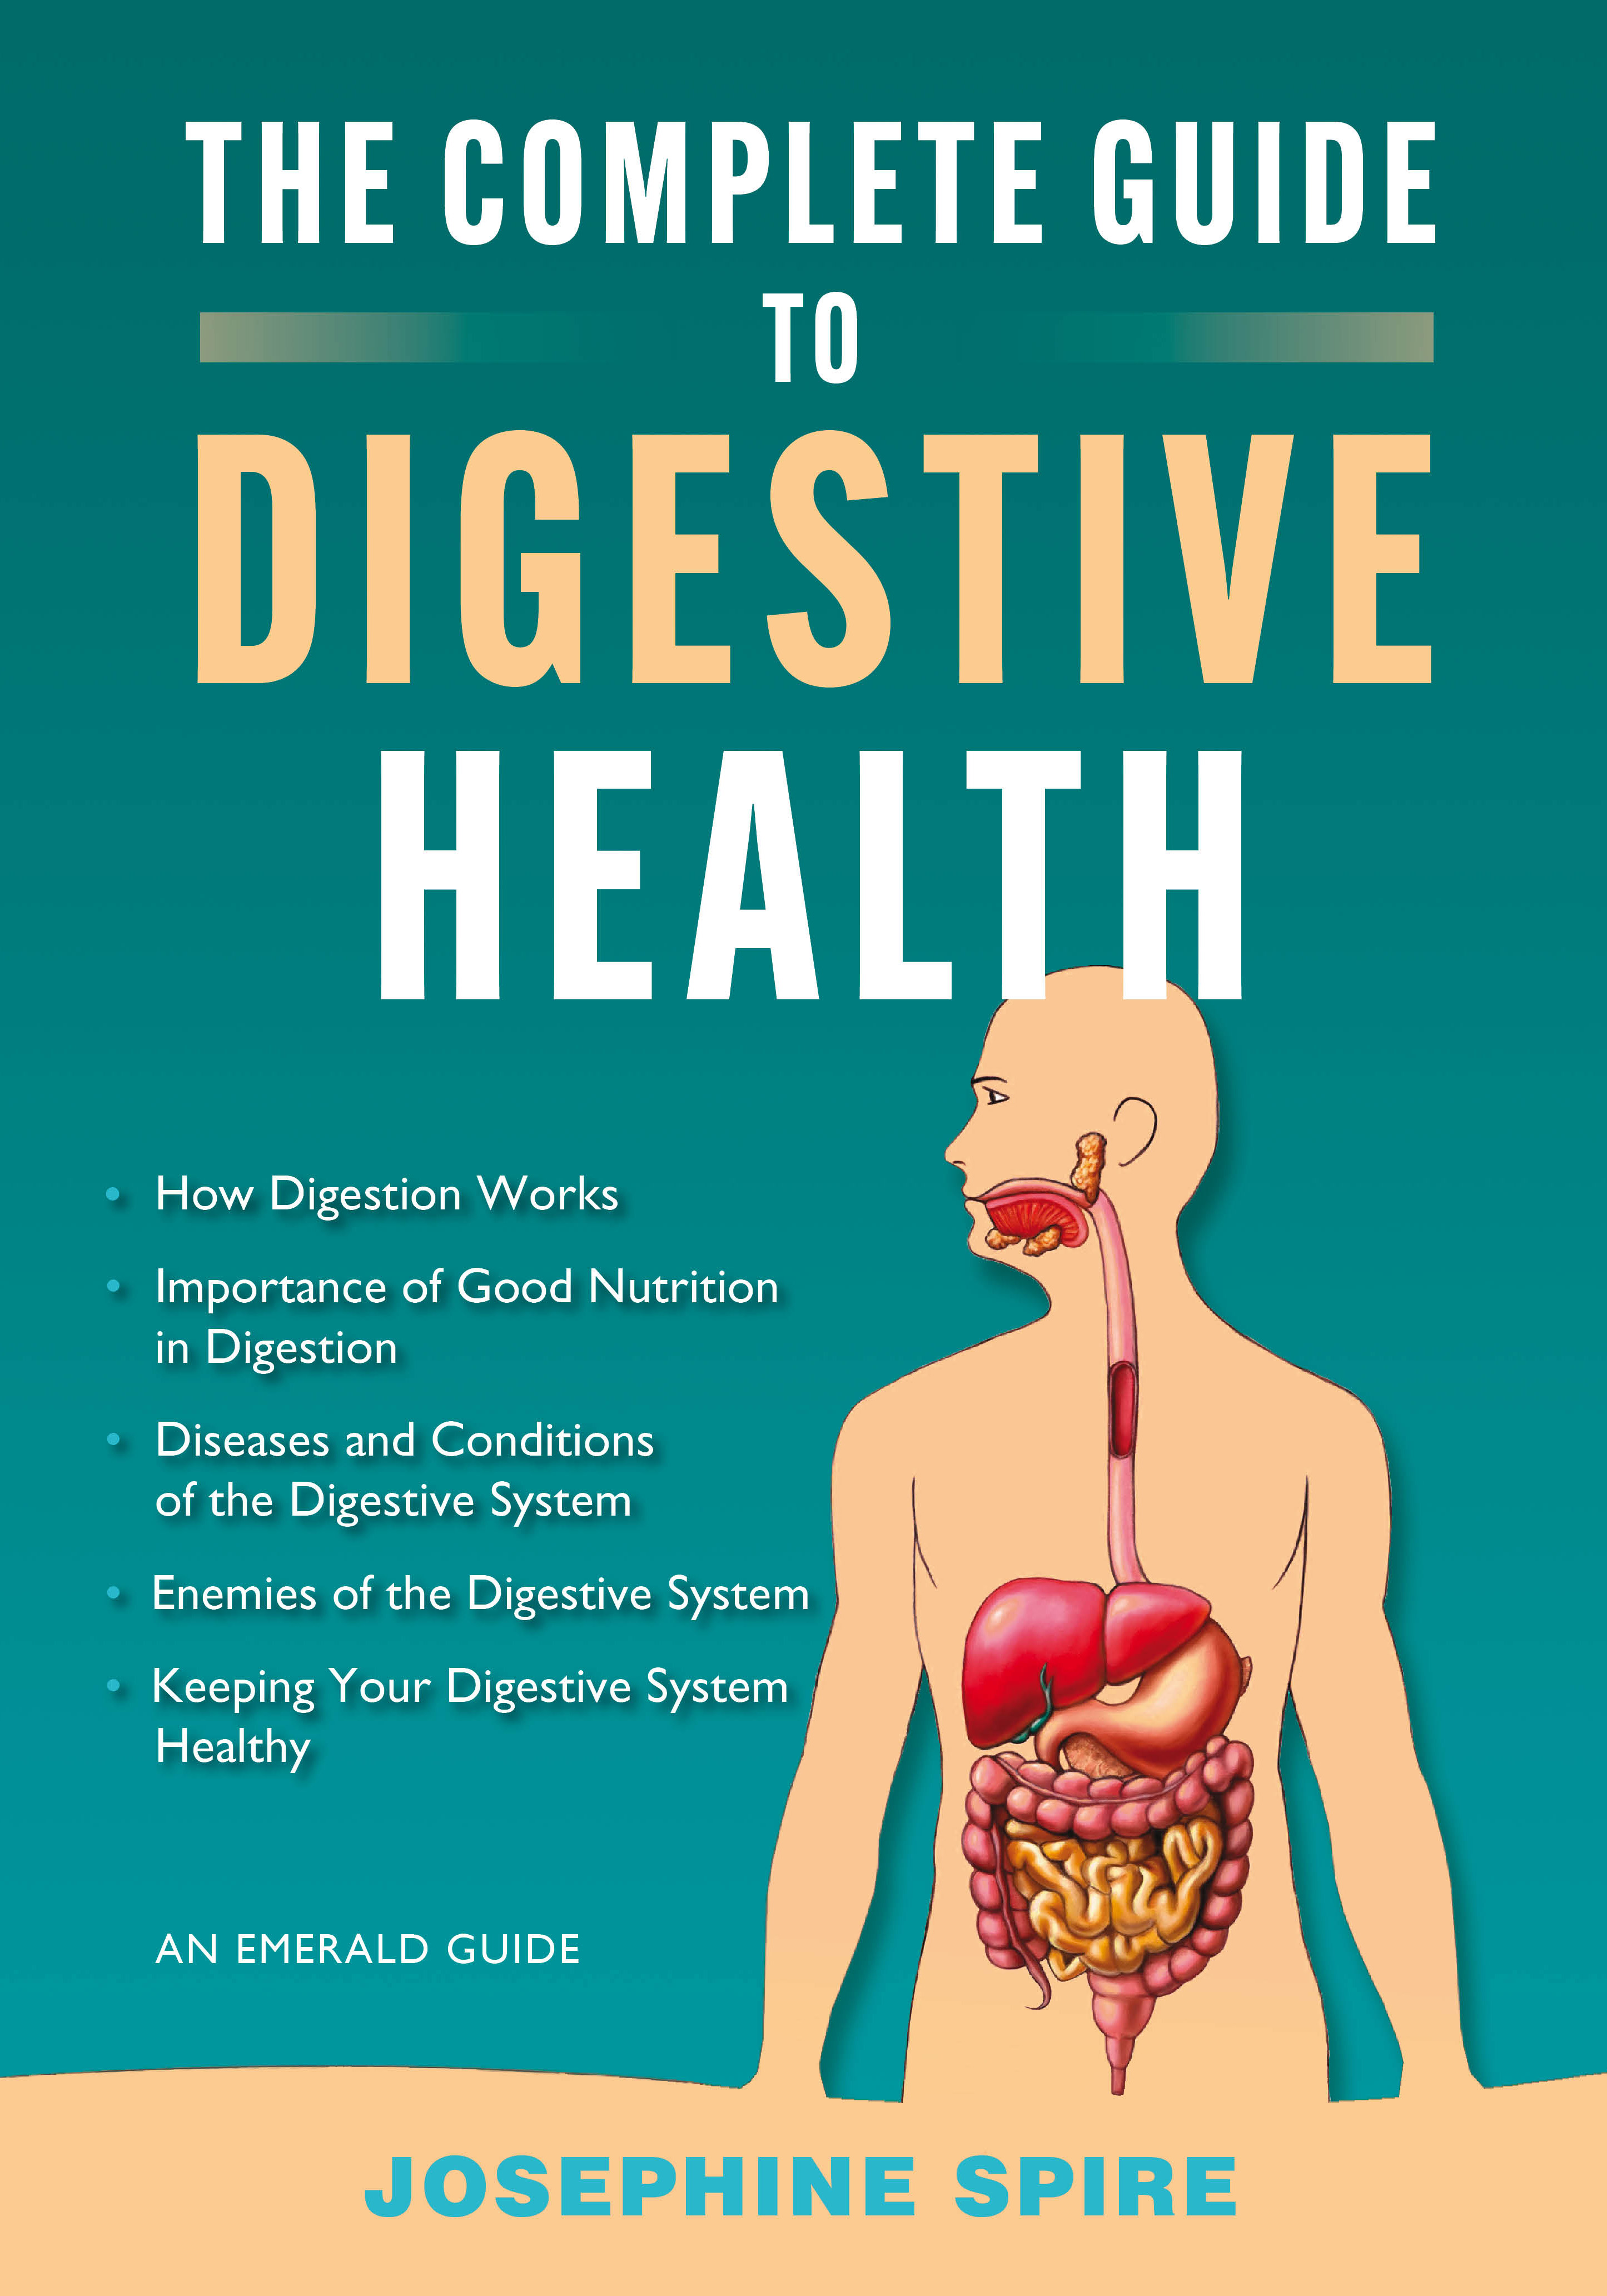 Digestive health guidelines